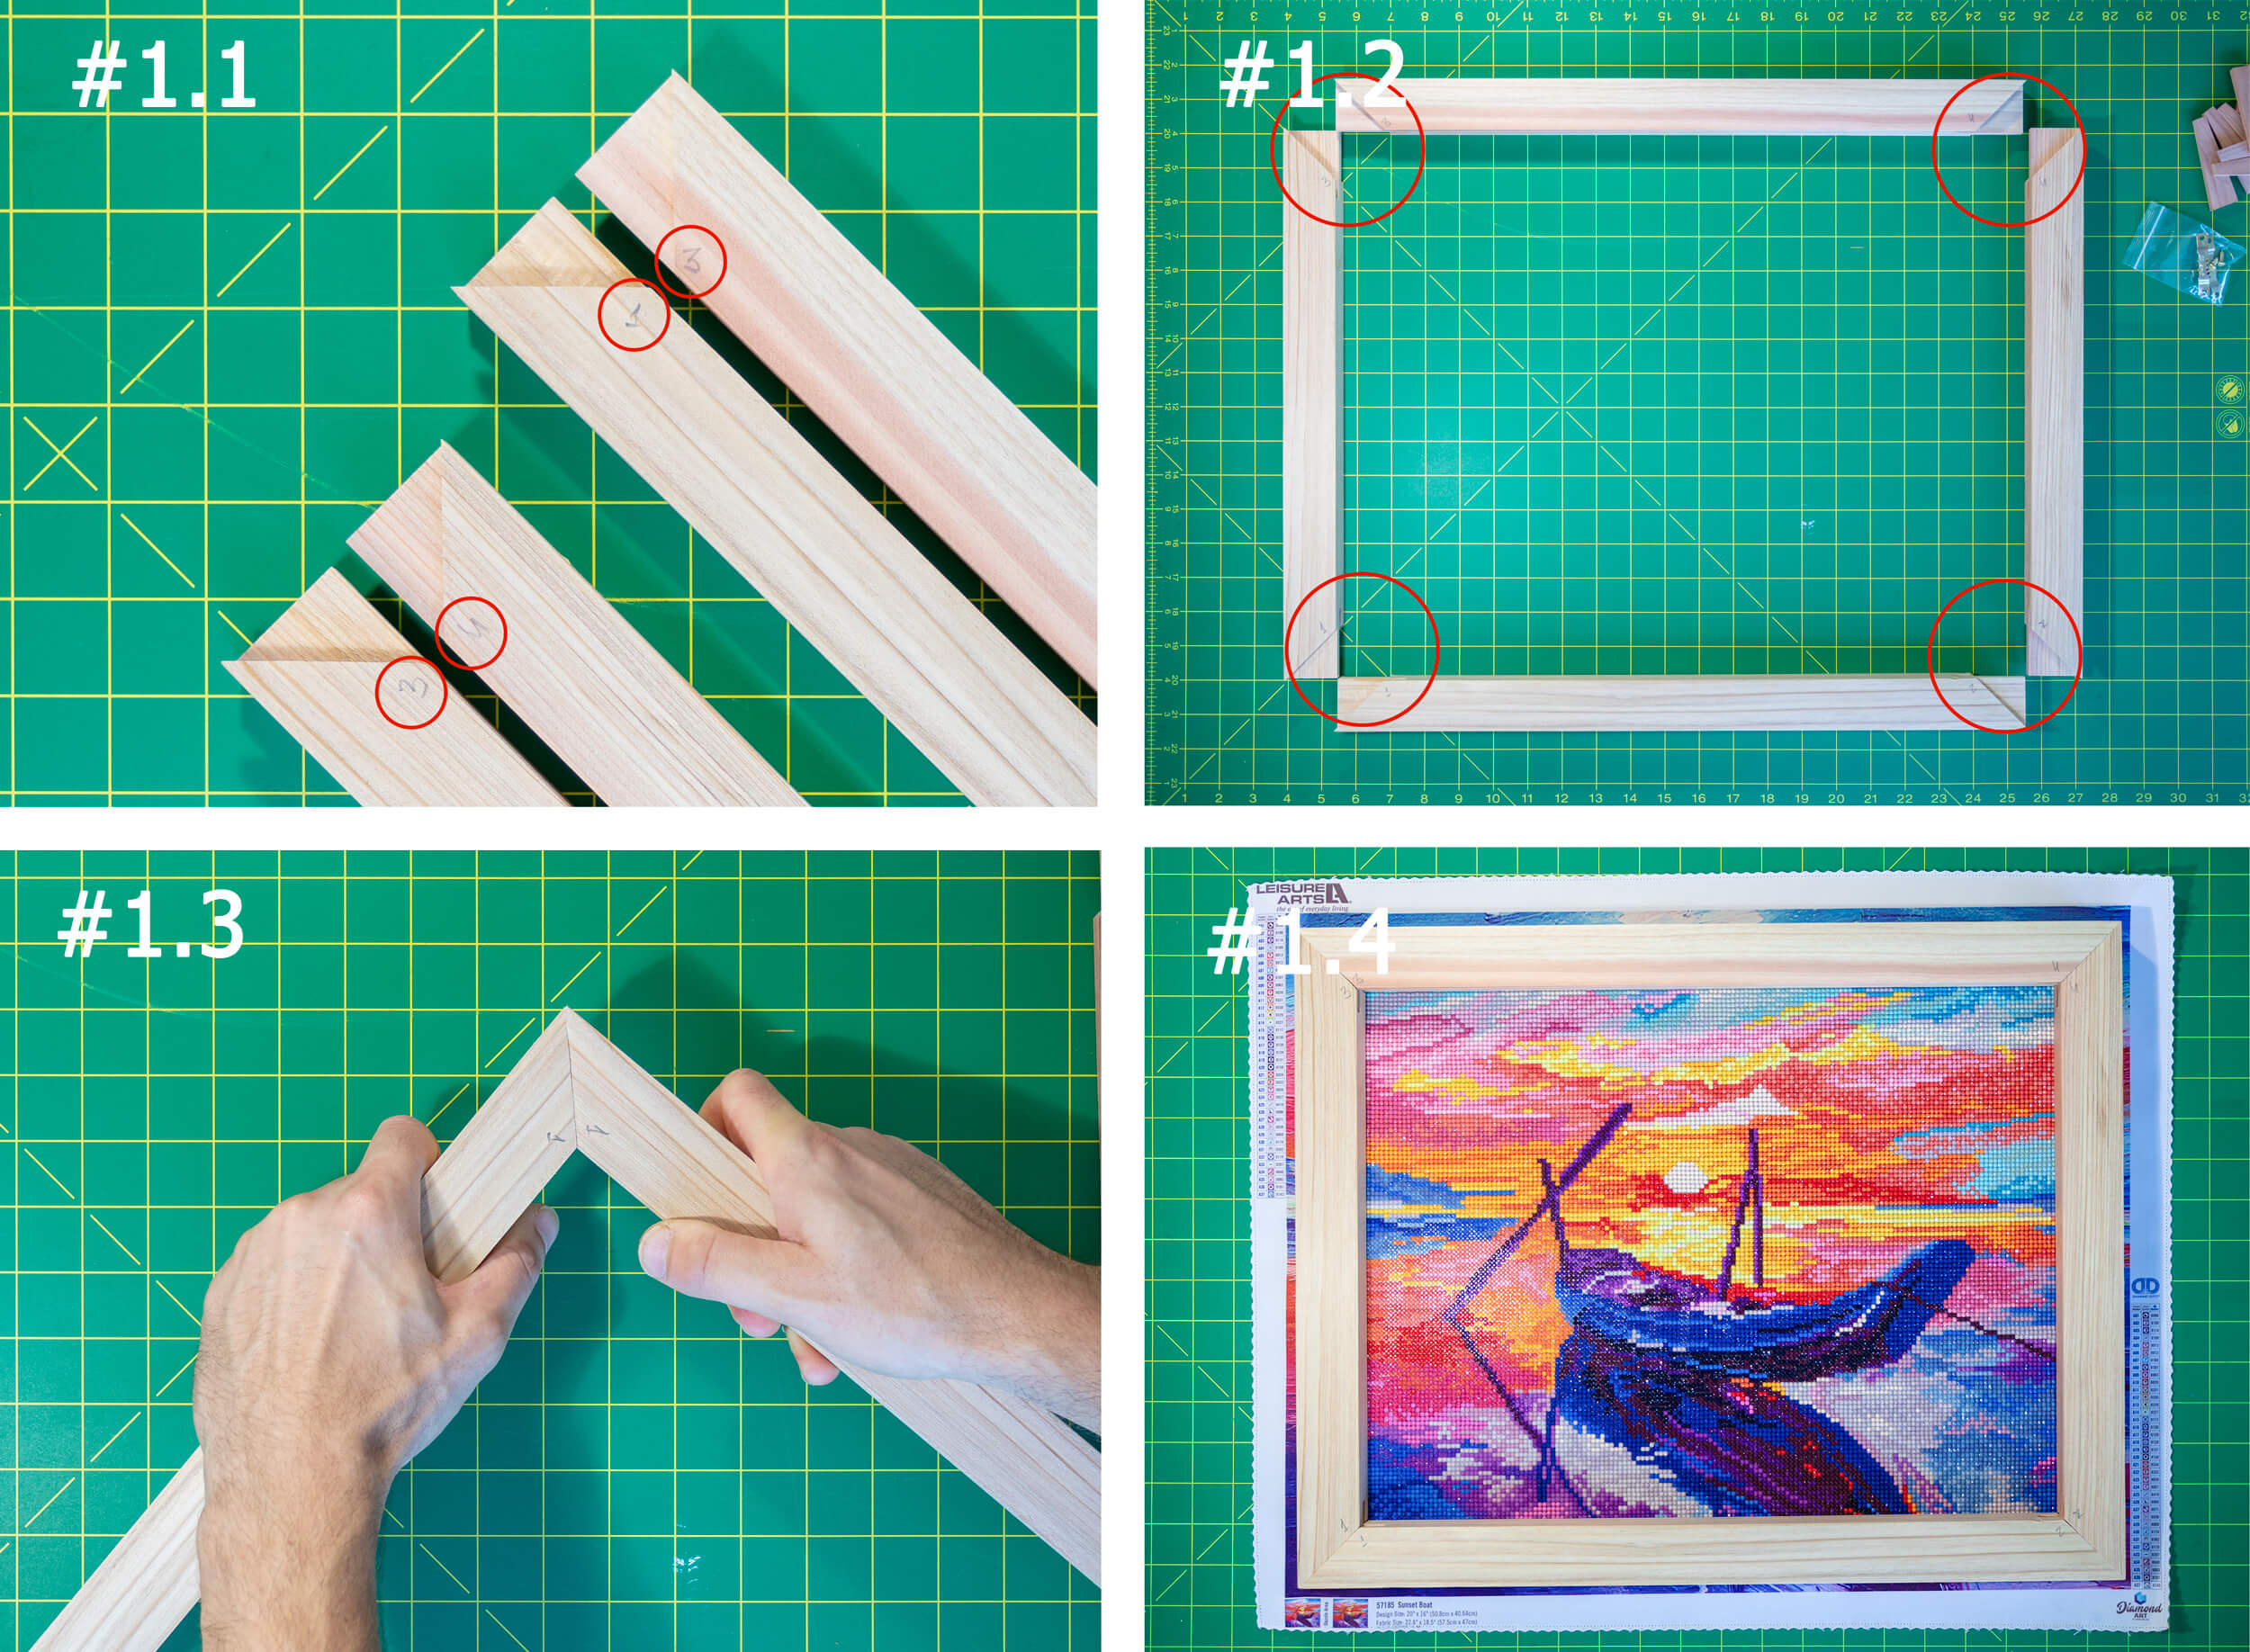 Diamond painting stretching frame assembly guide – Large Print Studio